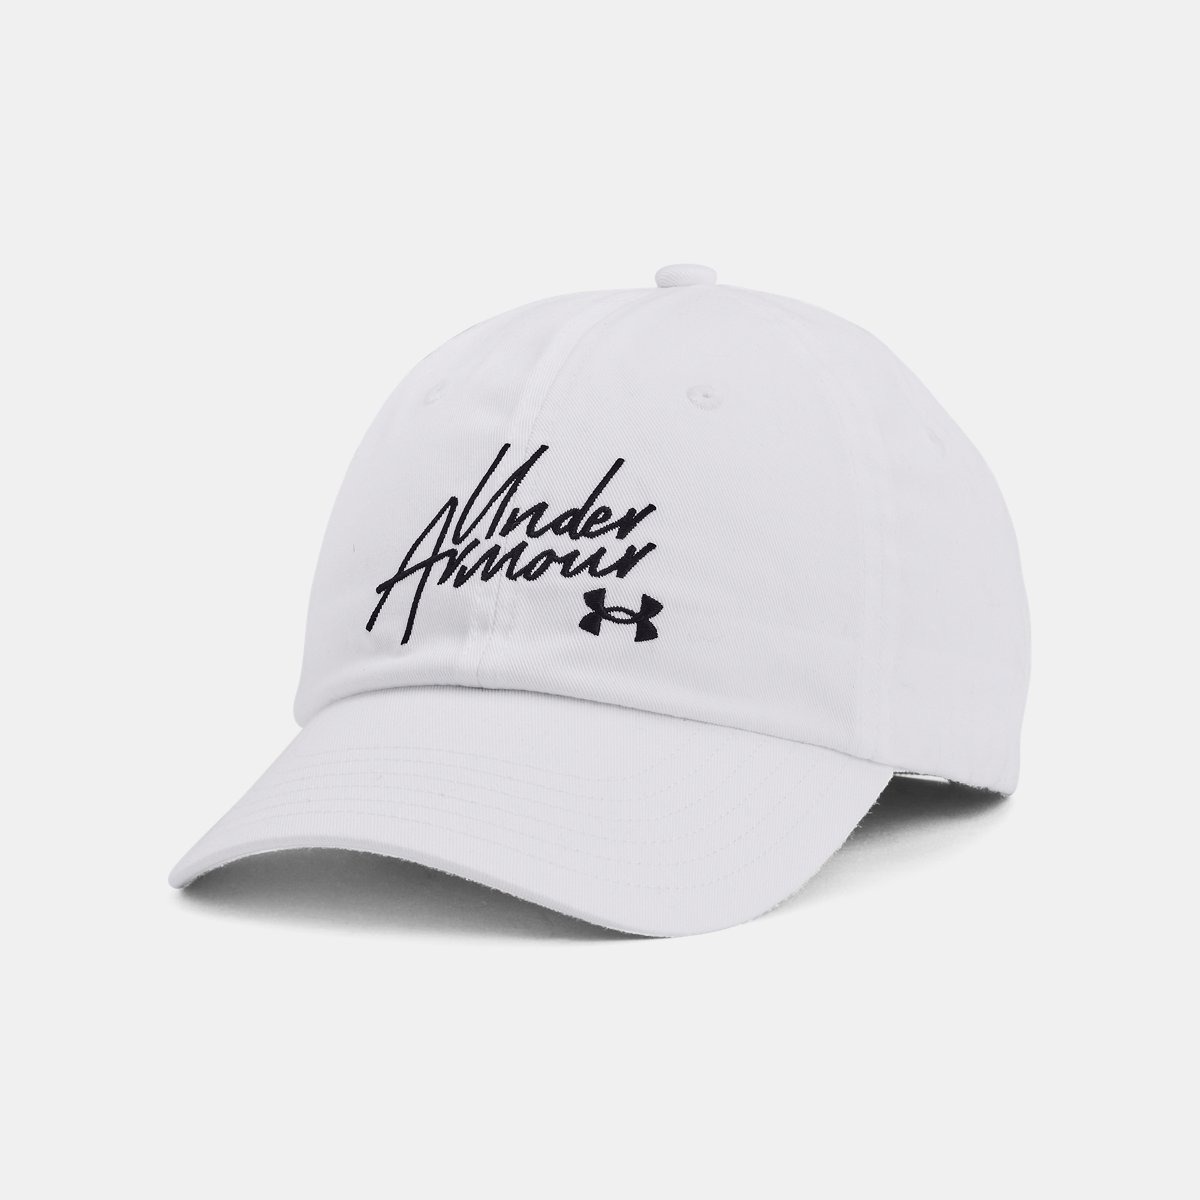 Caps White for Woman at Under Armour GOOFASH